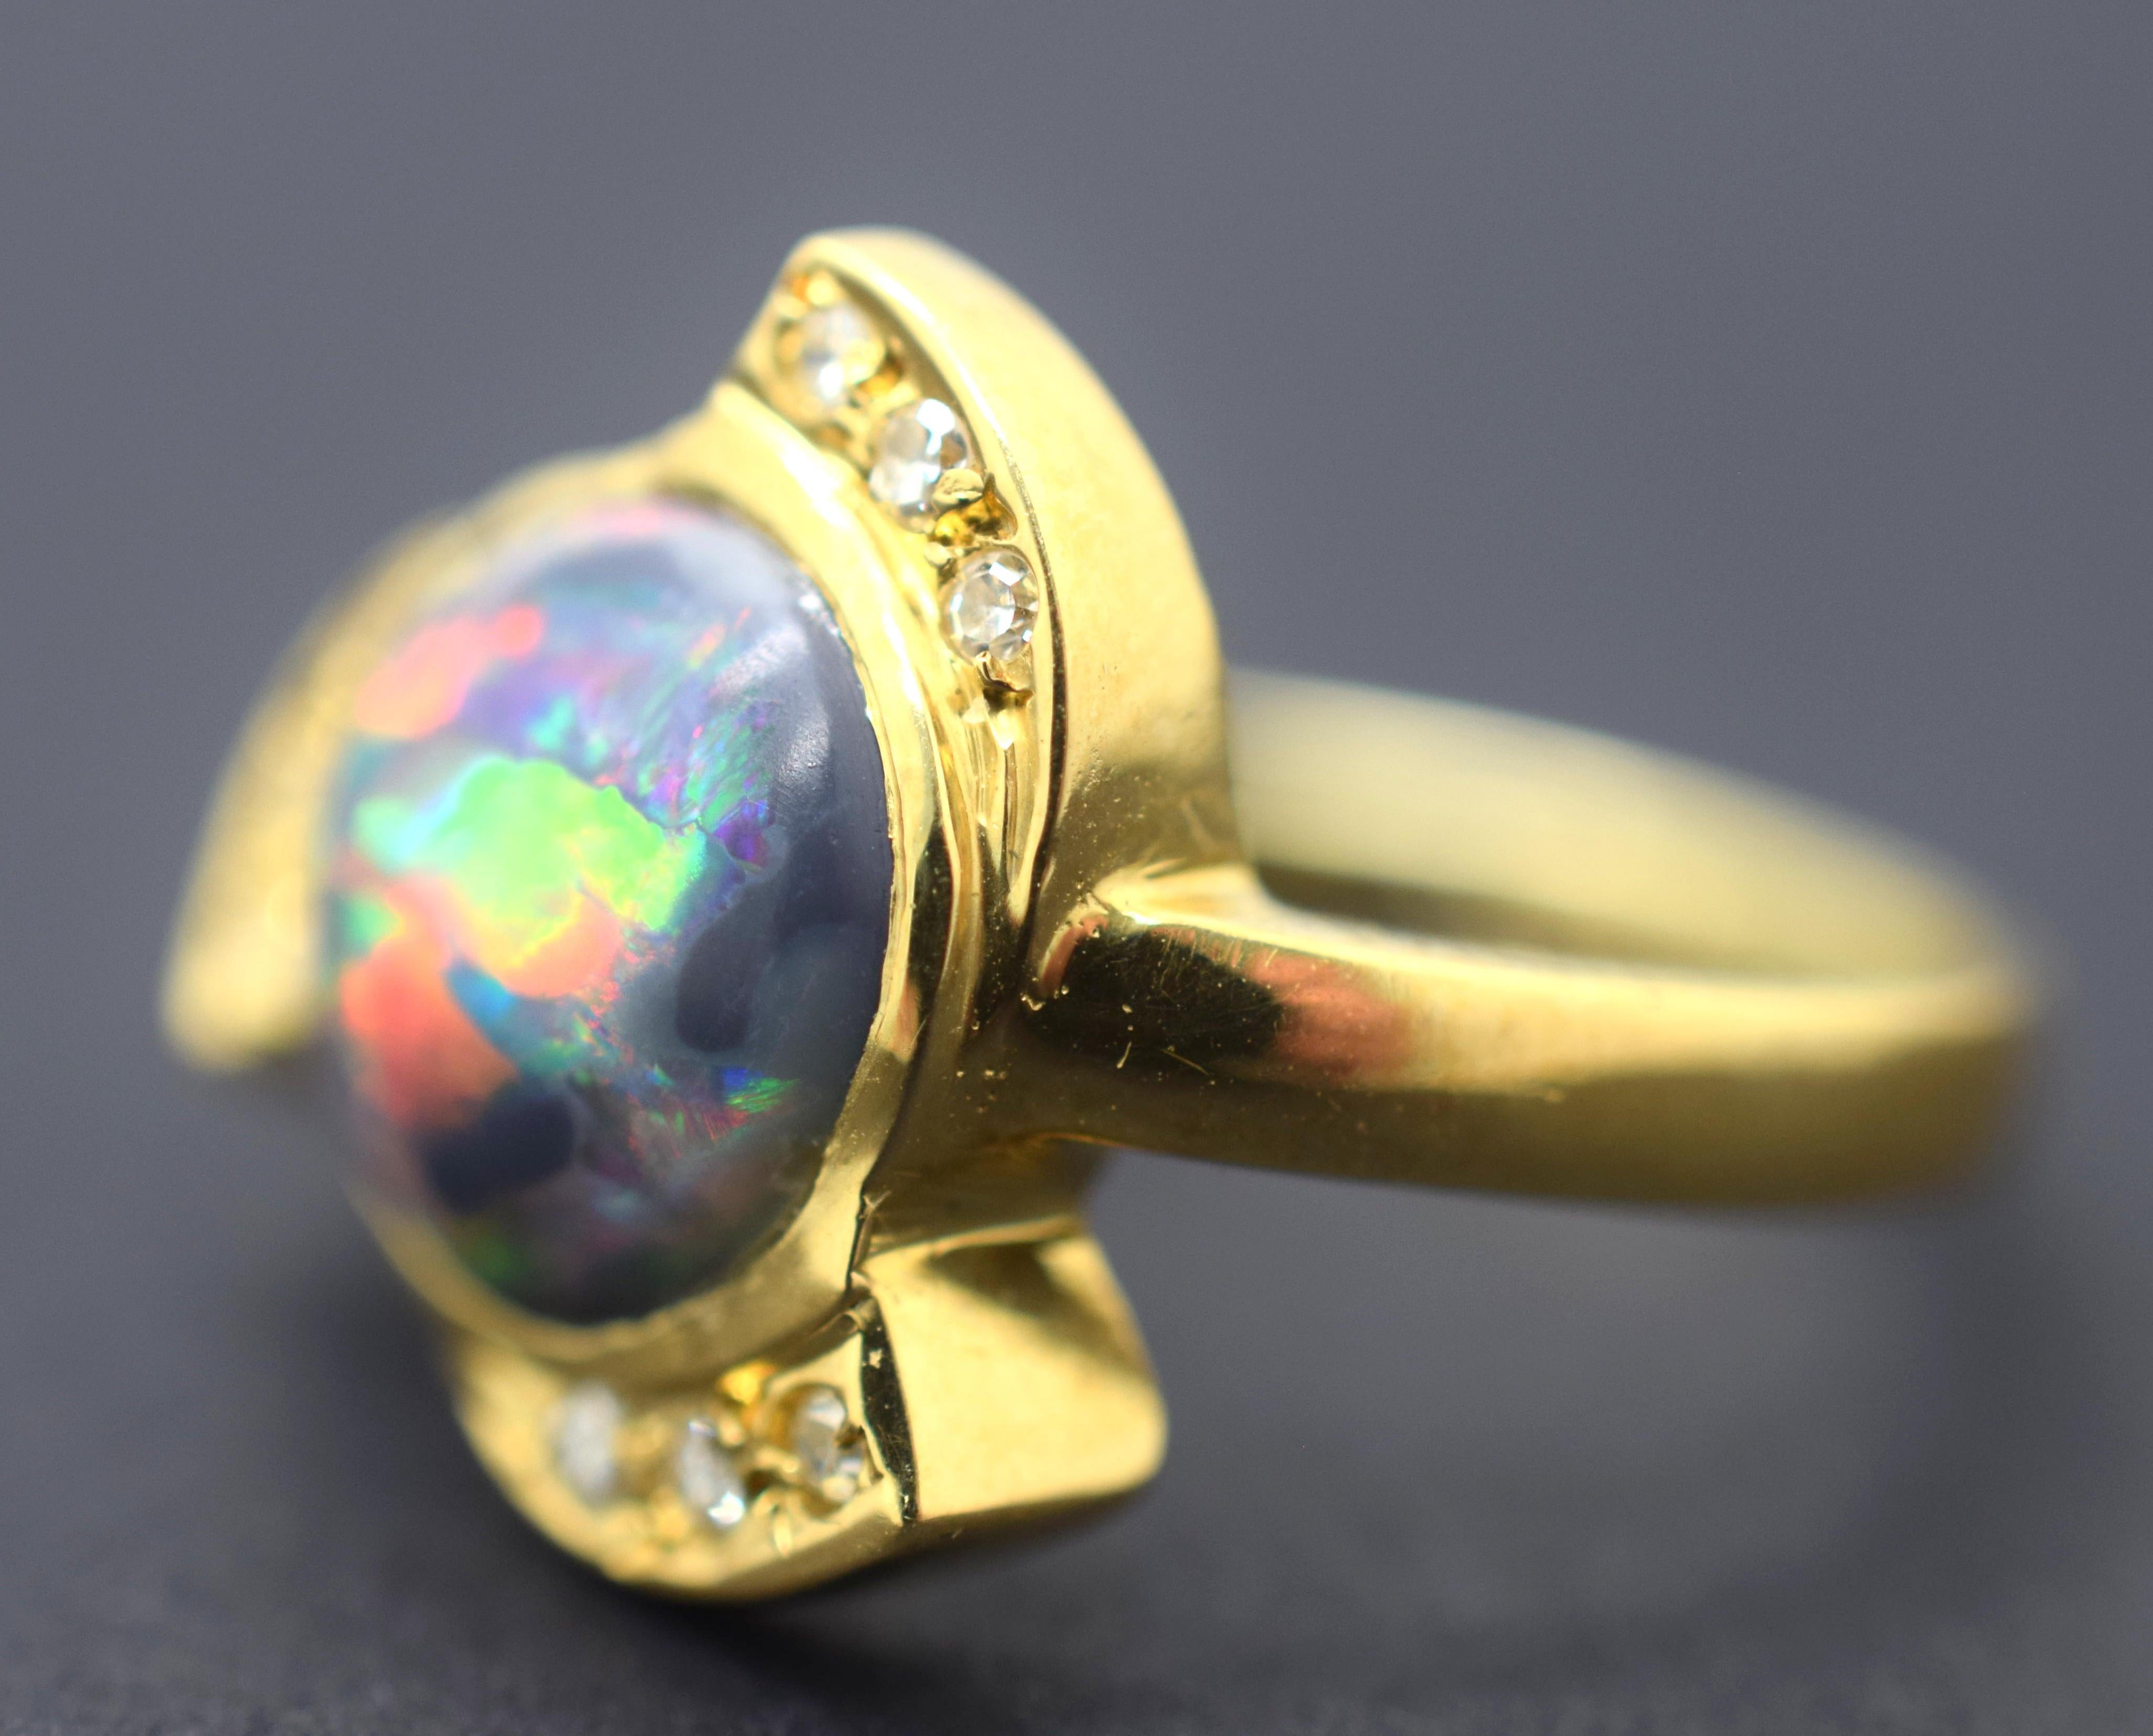 Fantastic estate Black Opal and Diamond Ring. This ring is crafted in 18k yellow gold. The focal point of the ring is a cabochon Black Opal with  beautiful play of color. Red, green and blue flash across this ring with an electric display of colors.